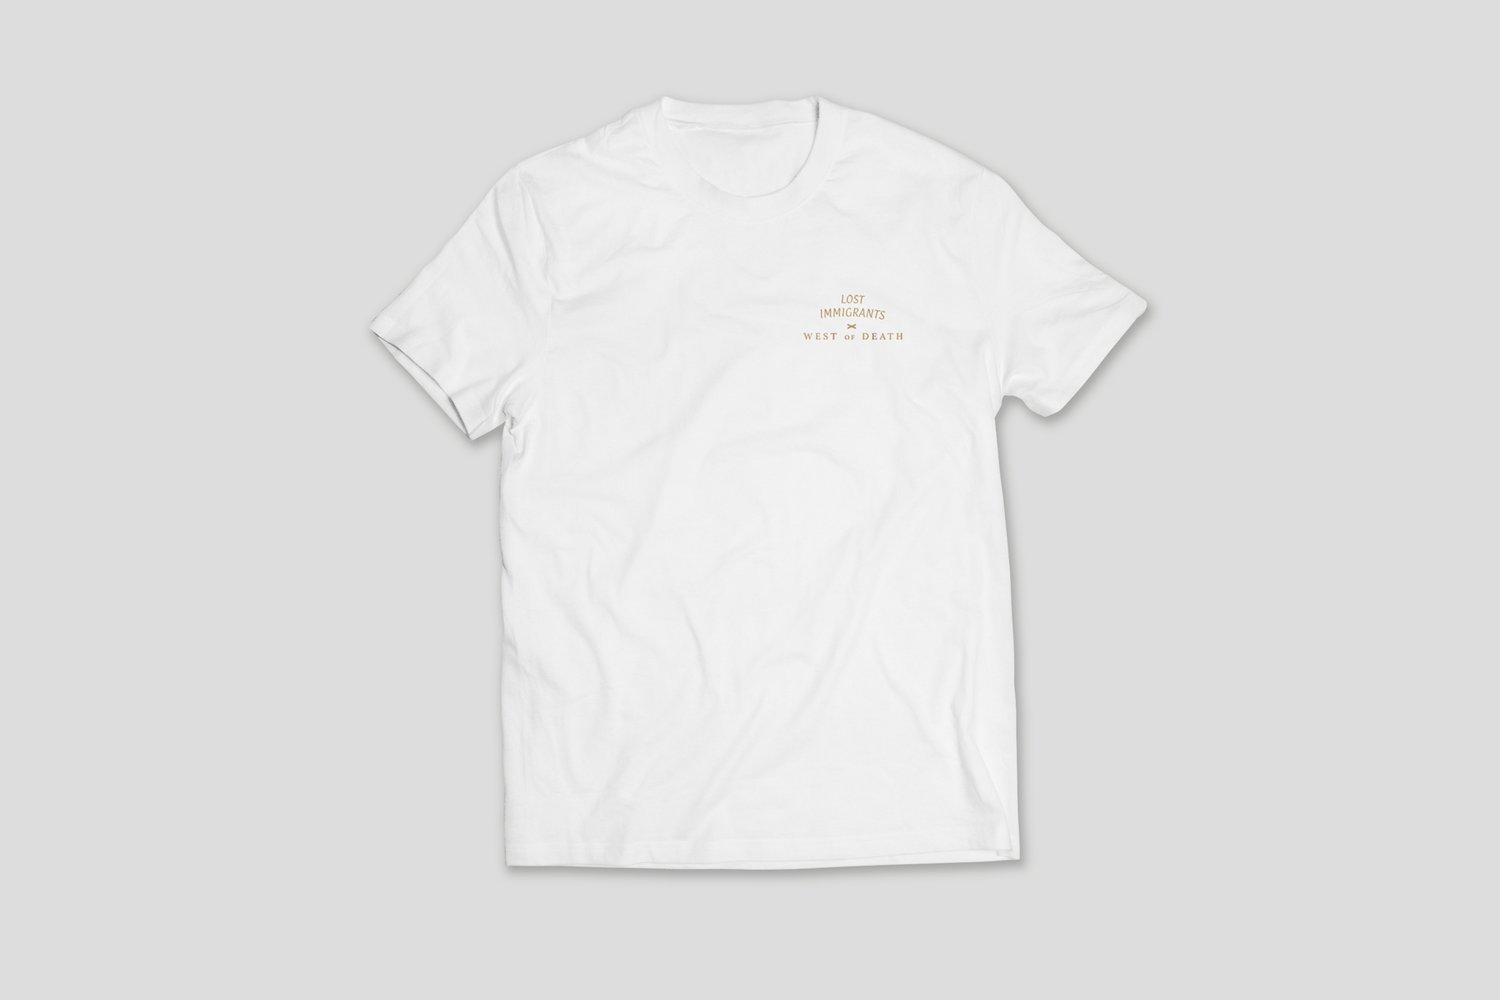 Image of White Lost Immigrants x West of Death Tee